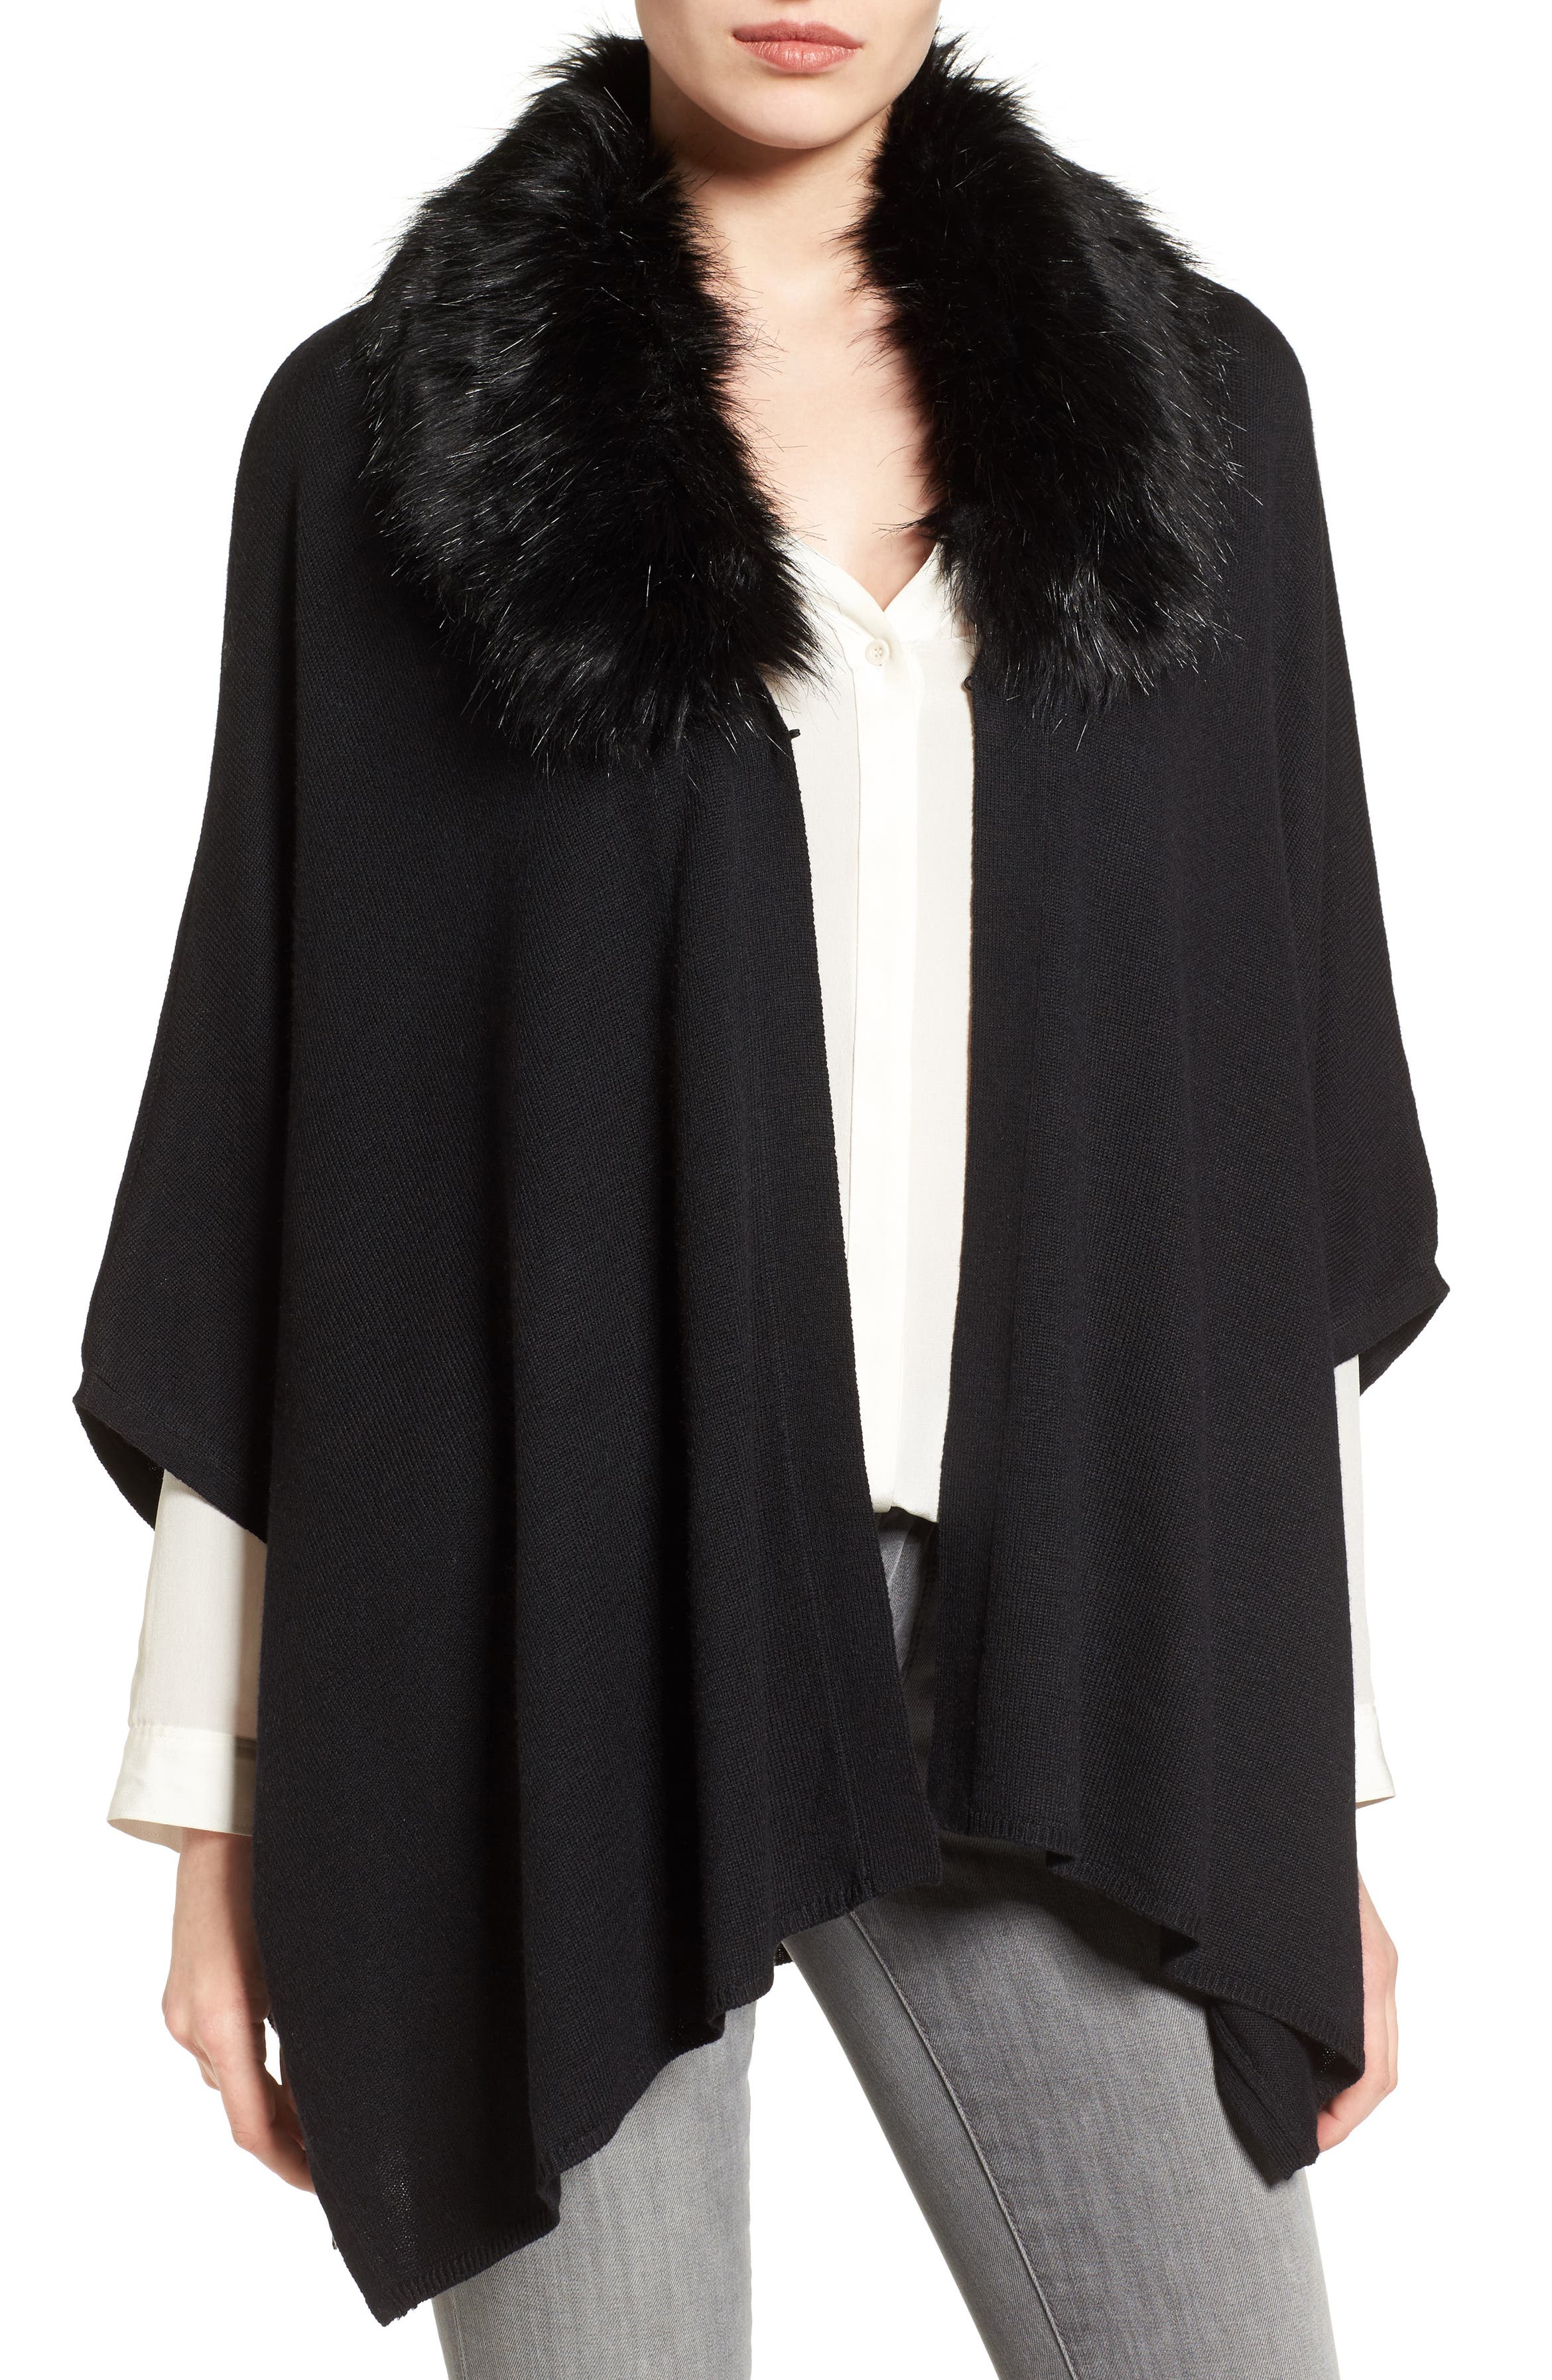 Nordstrom Knit Poncho with Faux Fur Collar | Nordstrom